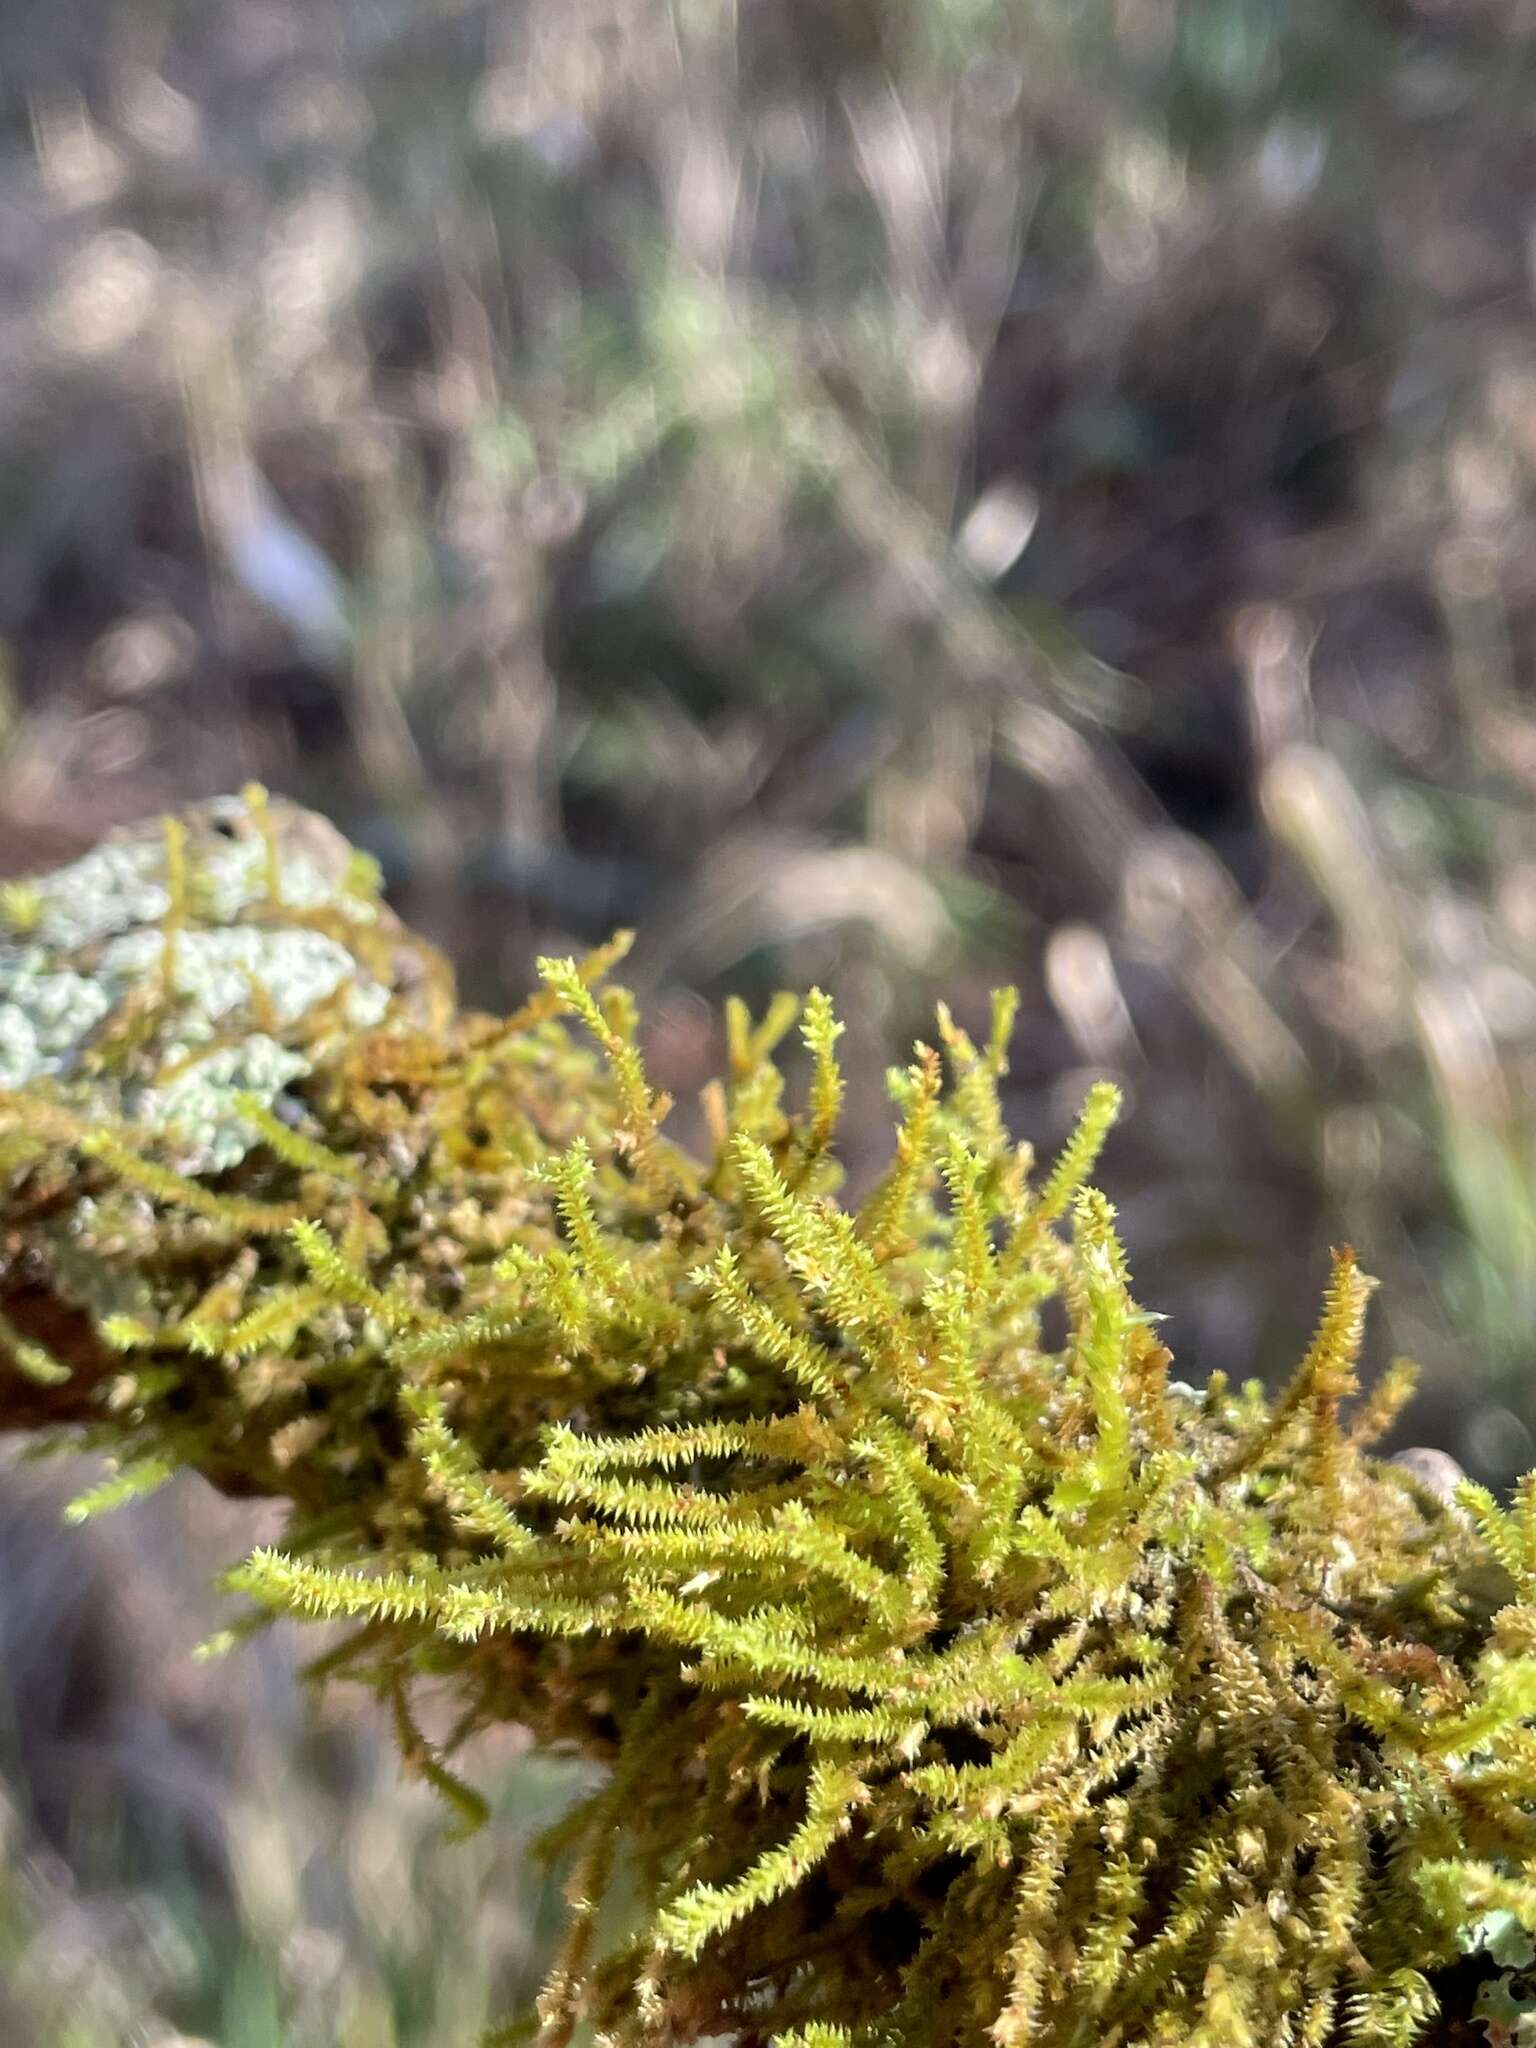 Image of cryphaea moss